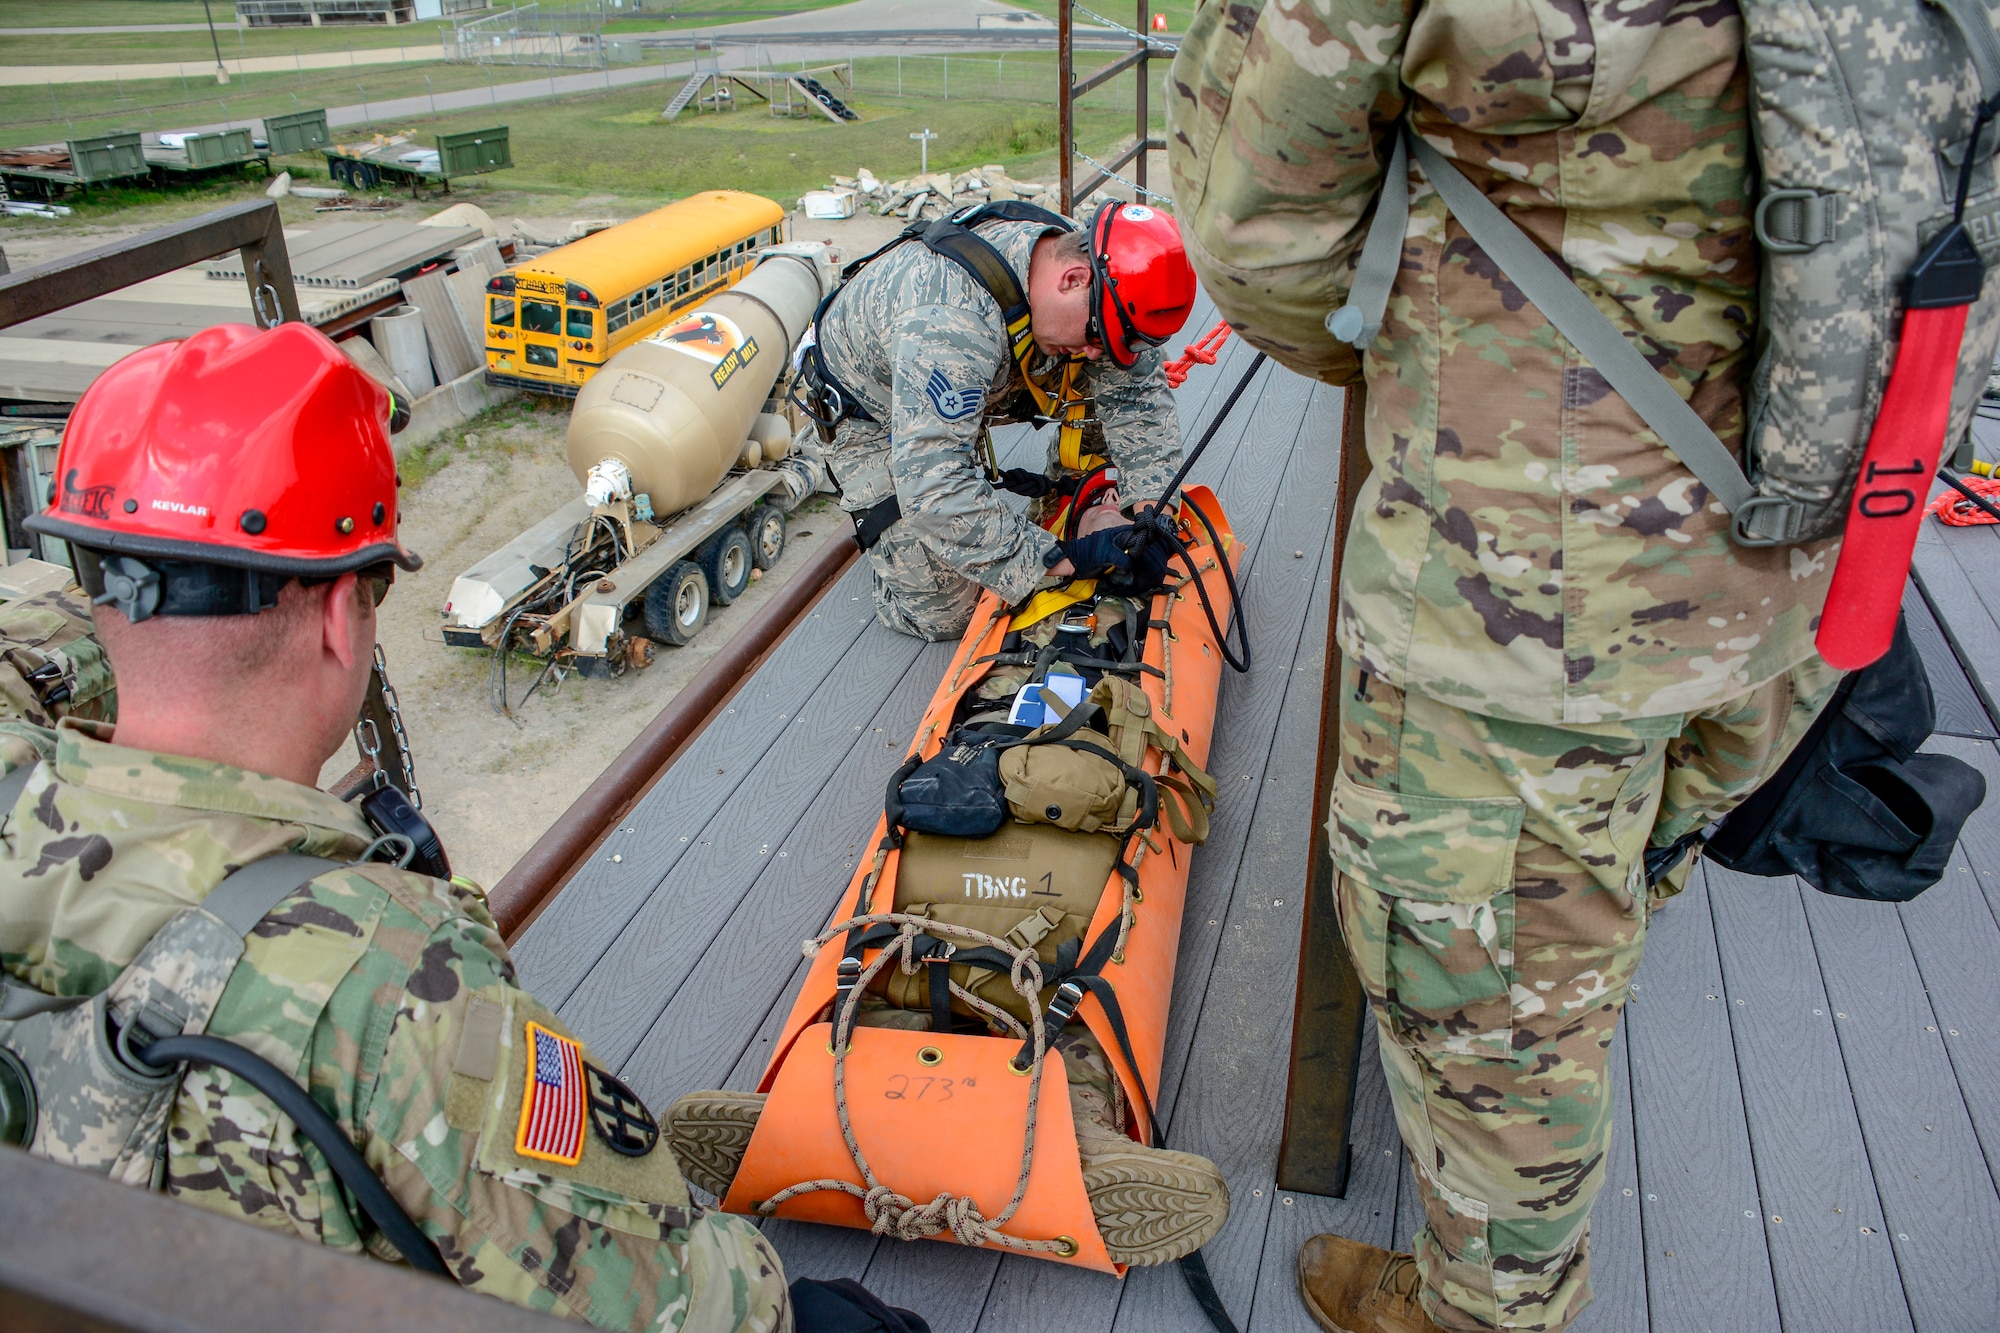 Joint military members with the Wisconsin Chemical, Biological, Radiological, Nuclear and High Yield Explosive Enhanced Response Force Package Medical Group prep a soldier for a sked drop over the side of a building as part of the 2018 External Evaluation exercise at Volk Field Air National Guard Base, Aug. 16, 2018. The ExEval is conducted as a way to re-validate the WI CERFP to perform its CBRN Response Enterprise mission in support of the State and Nation.(U.S. Air National Guard photo by Tech. Sgt. Mary E. Greenwood)